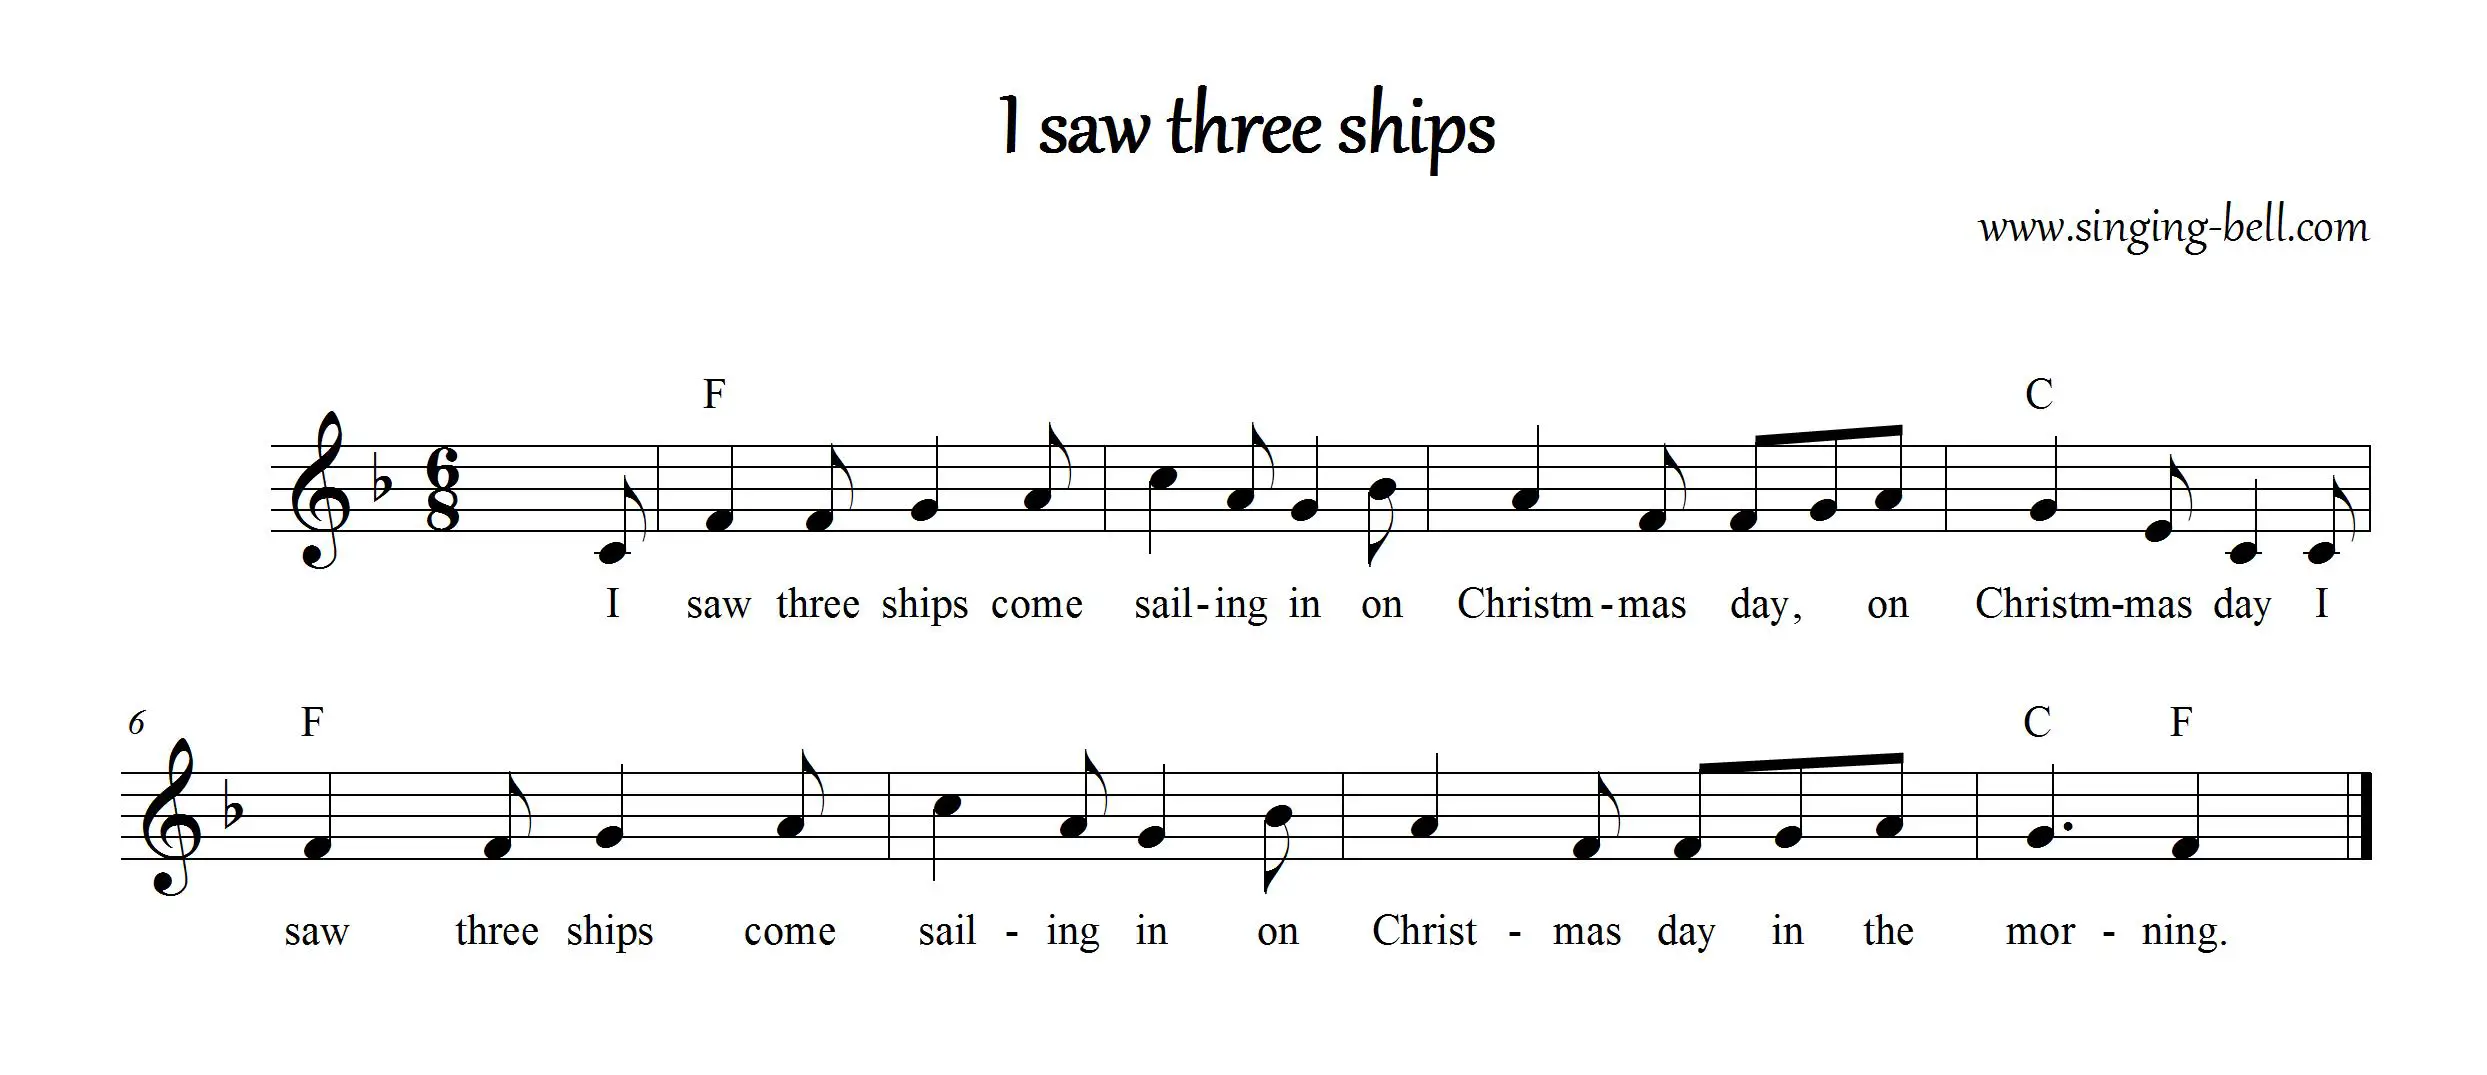 I saw three ships - Christmas Music Score (in F)